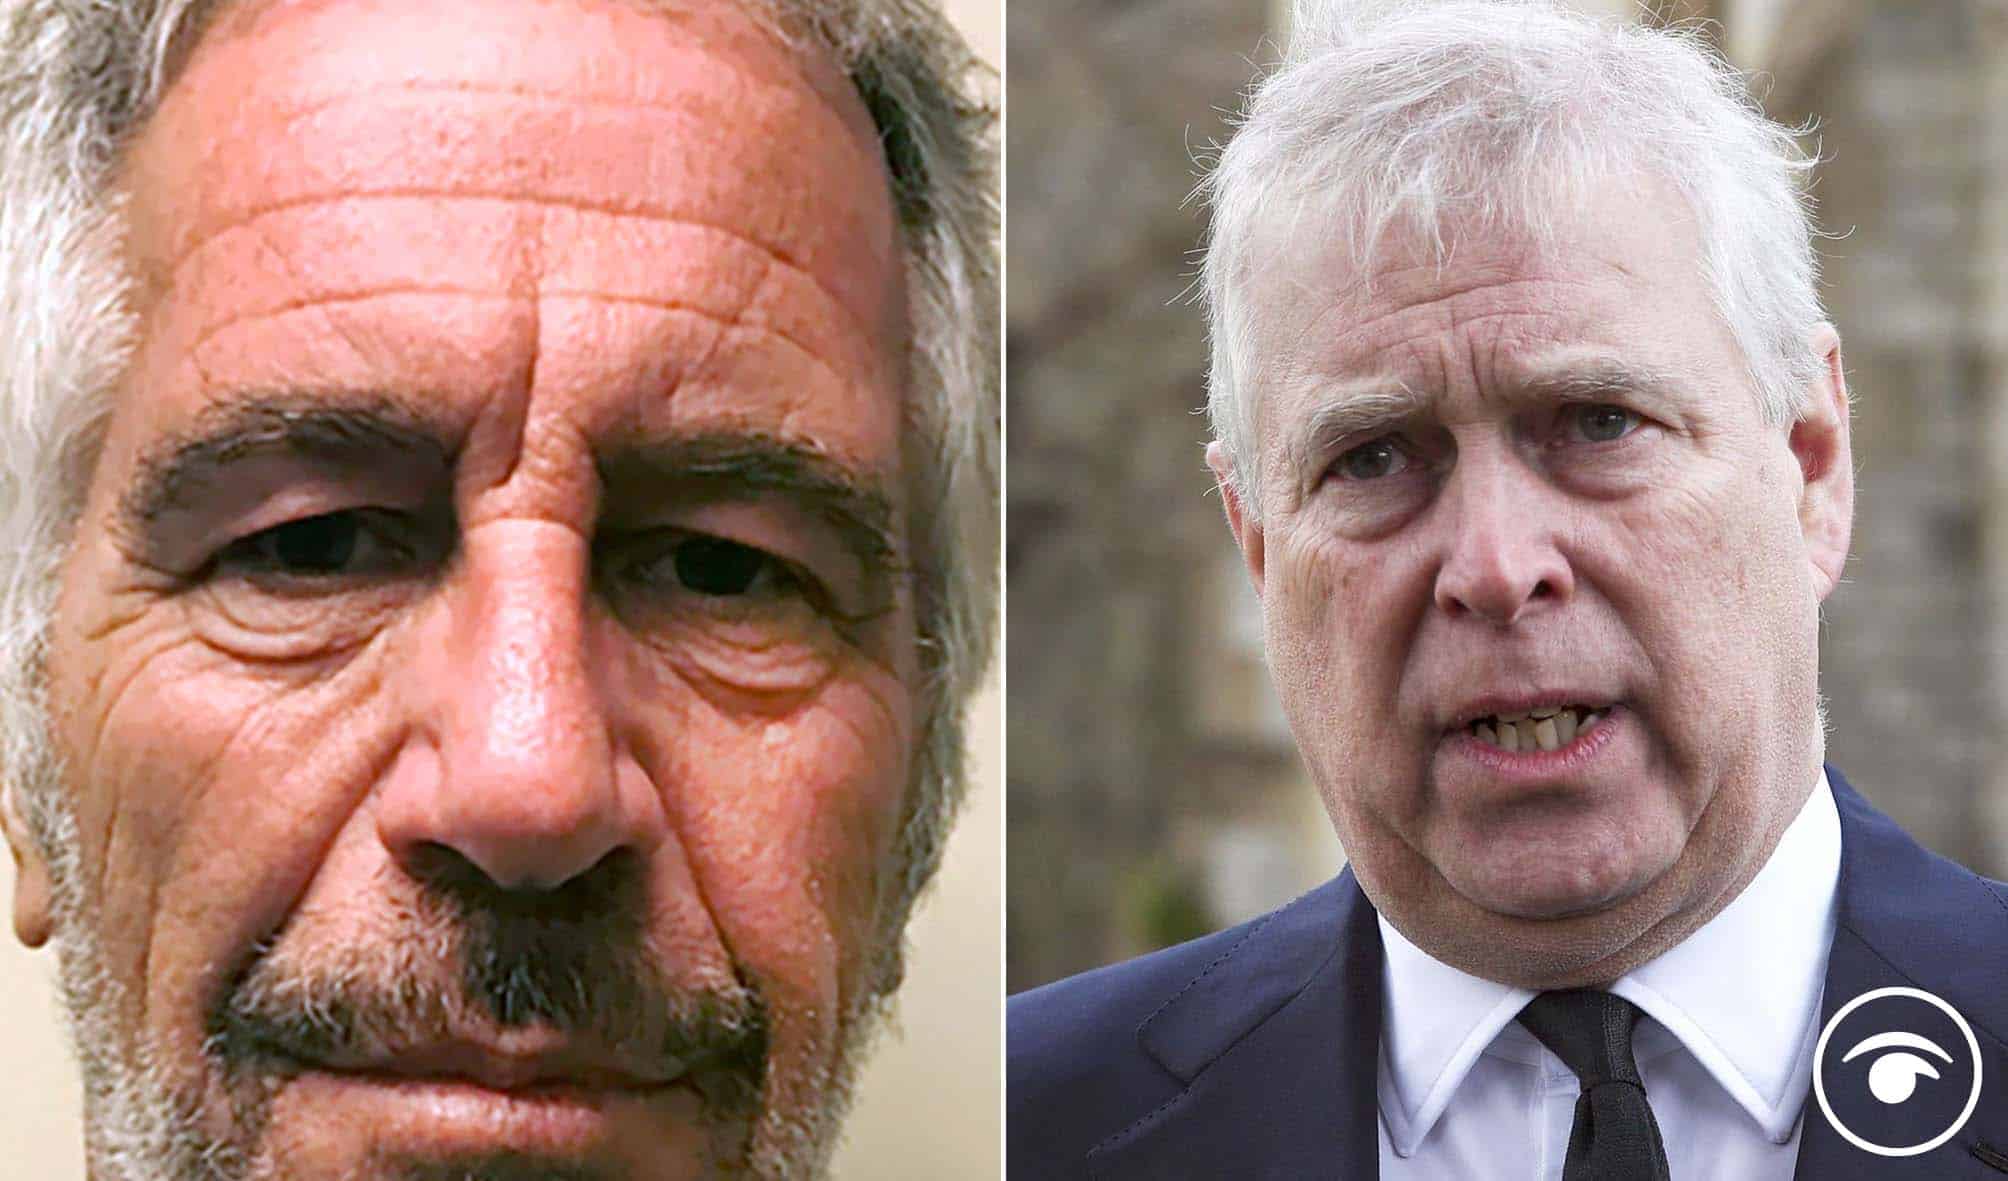 Prince Andrew sought permission from Queen to be quizzed on Epstein links